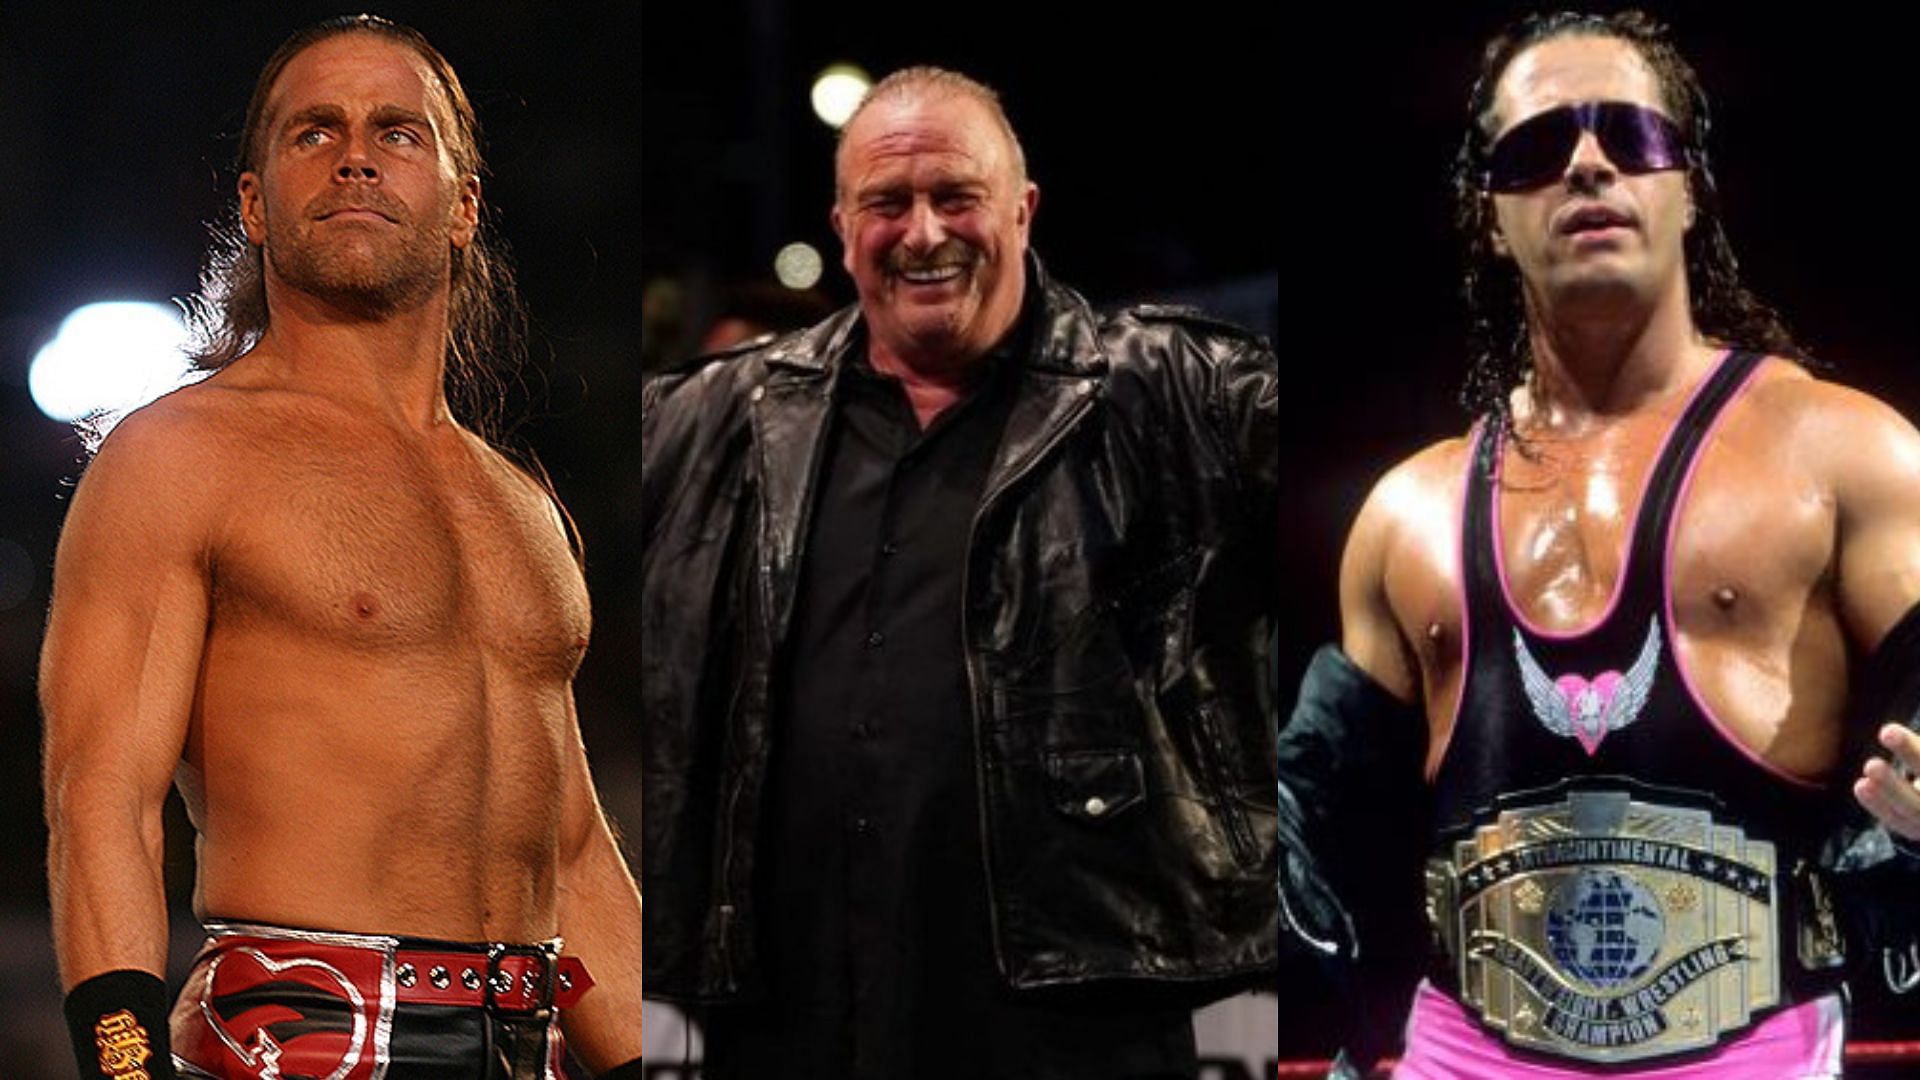 Shawn Michaels (left), Jake Roberts (middle) and Bret Hart (right).